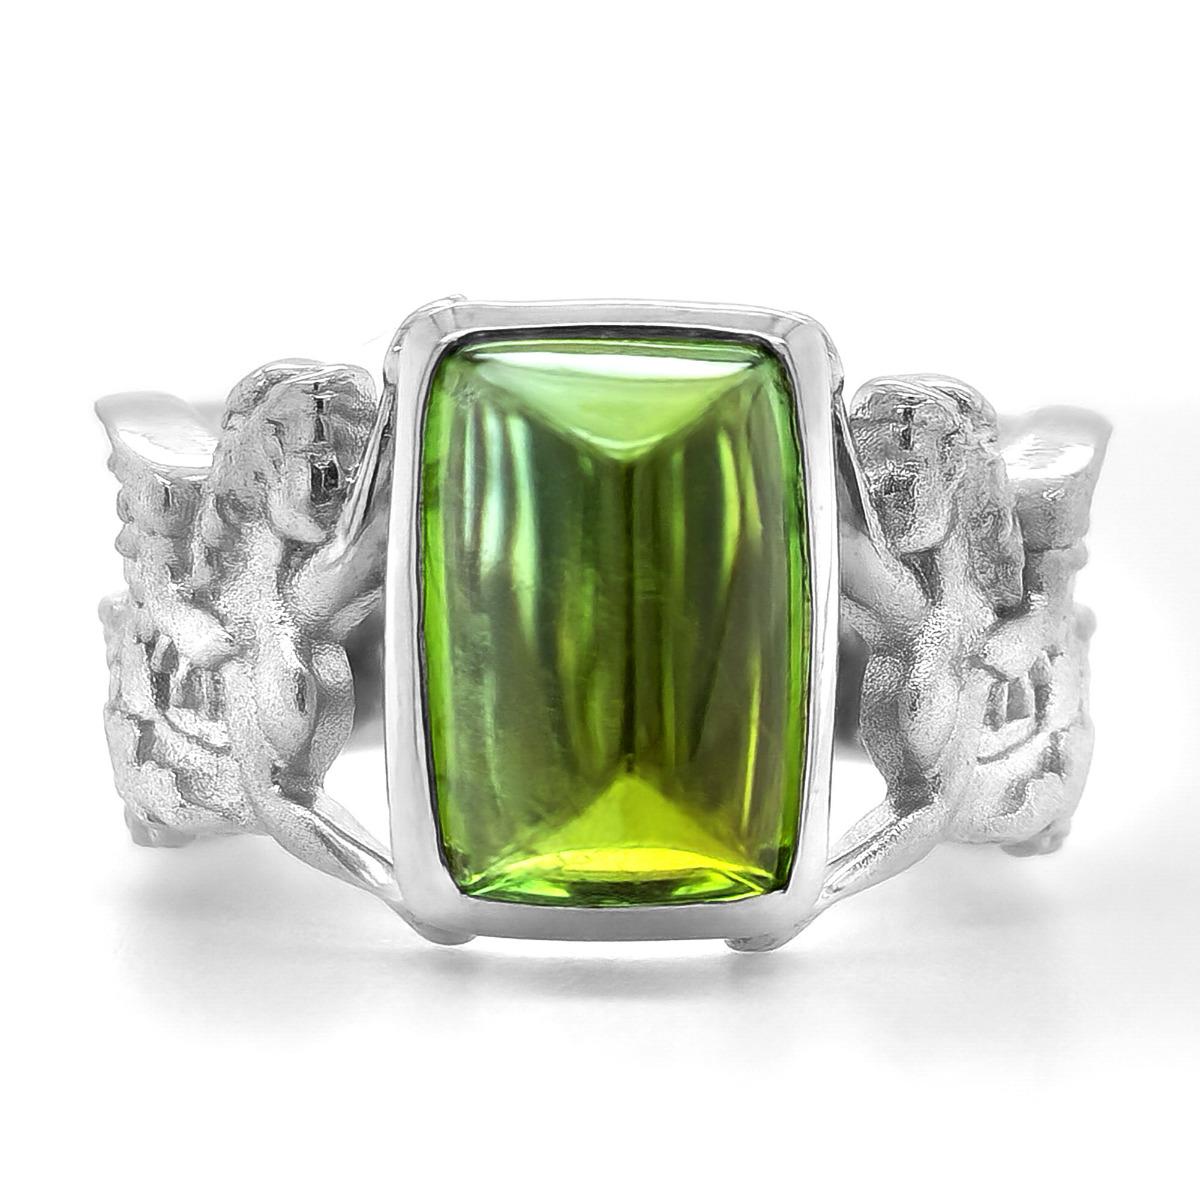 5.74 Carat Green Tourmaline Diamond set in 18K White Gold Ring In New Condition For Sale In Los Angeles, CA